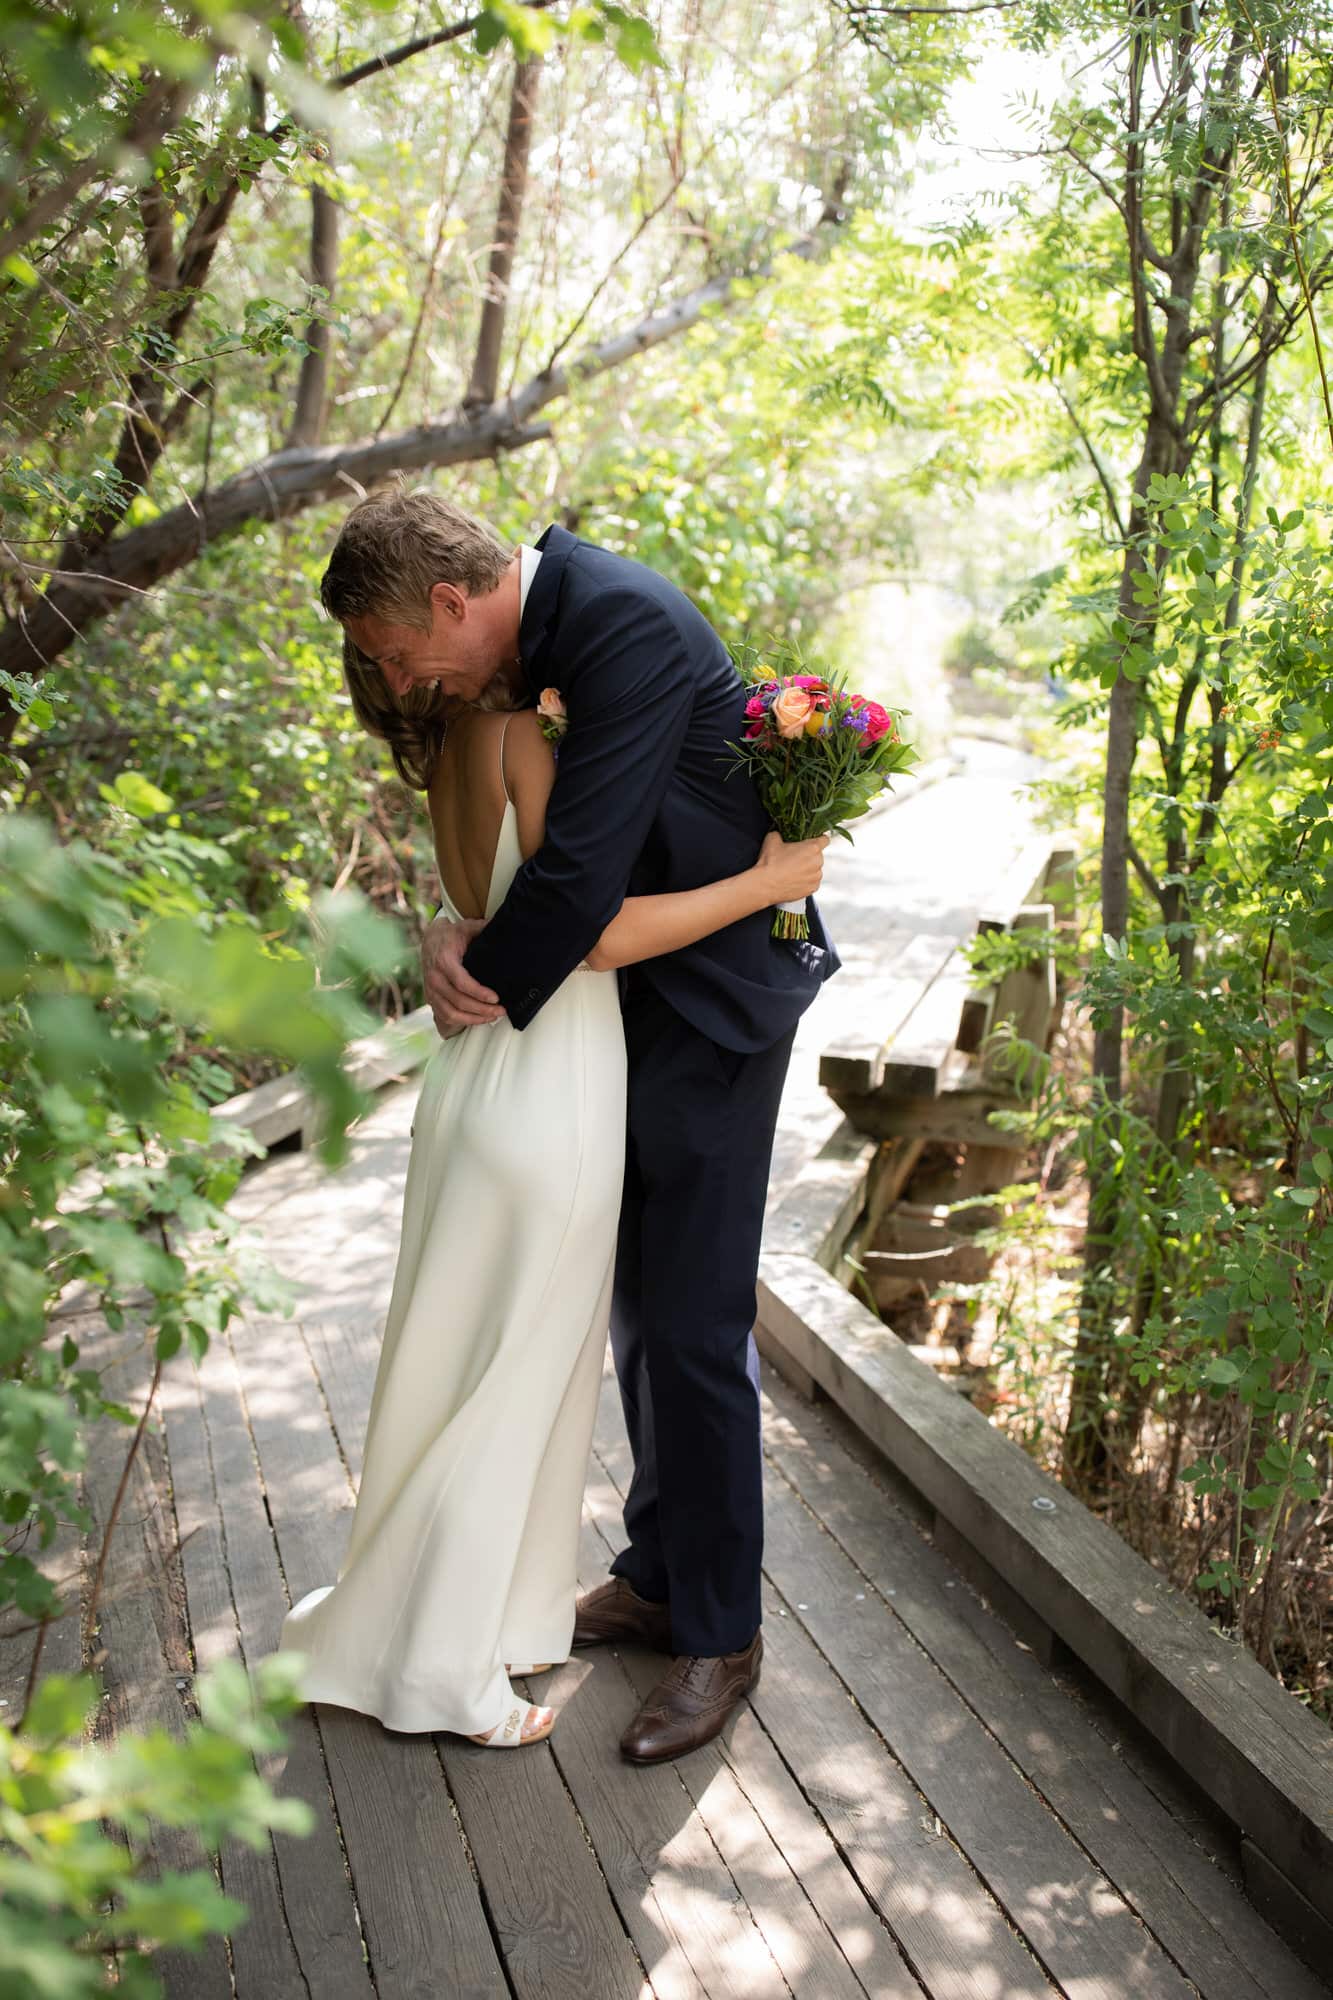 Bride and groom embrace during first look. Destination wedding photographer Brent Calis.